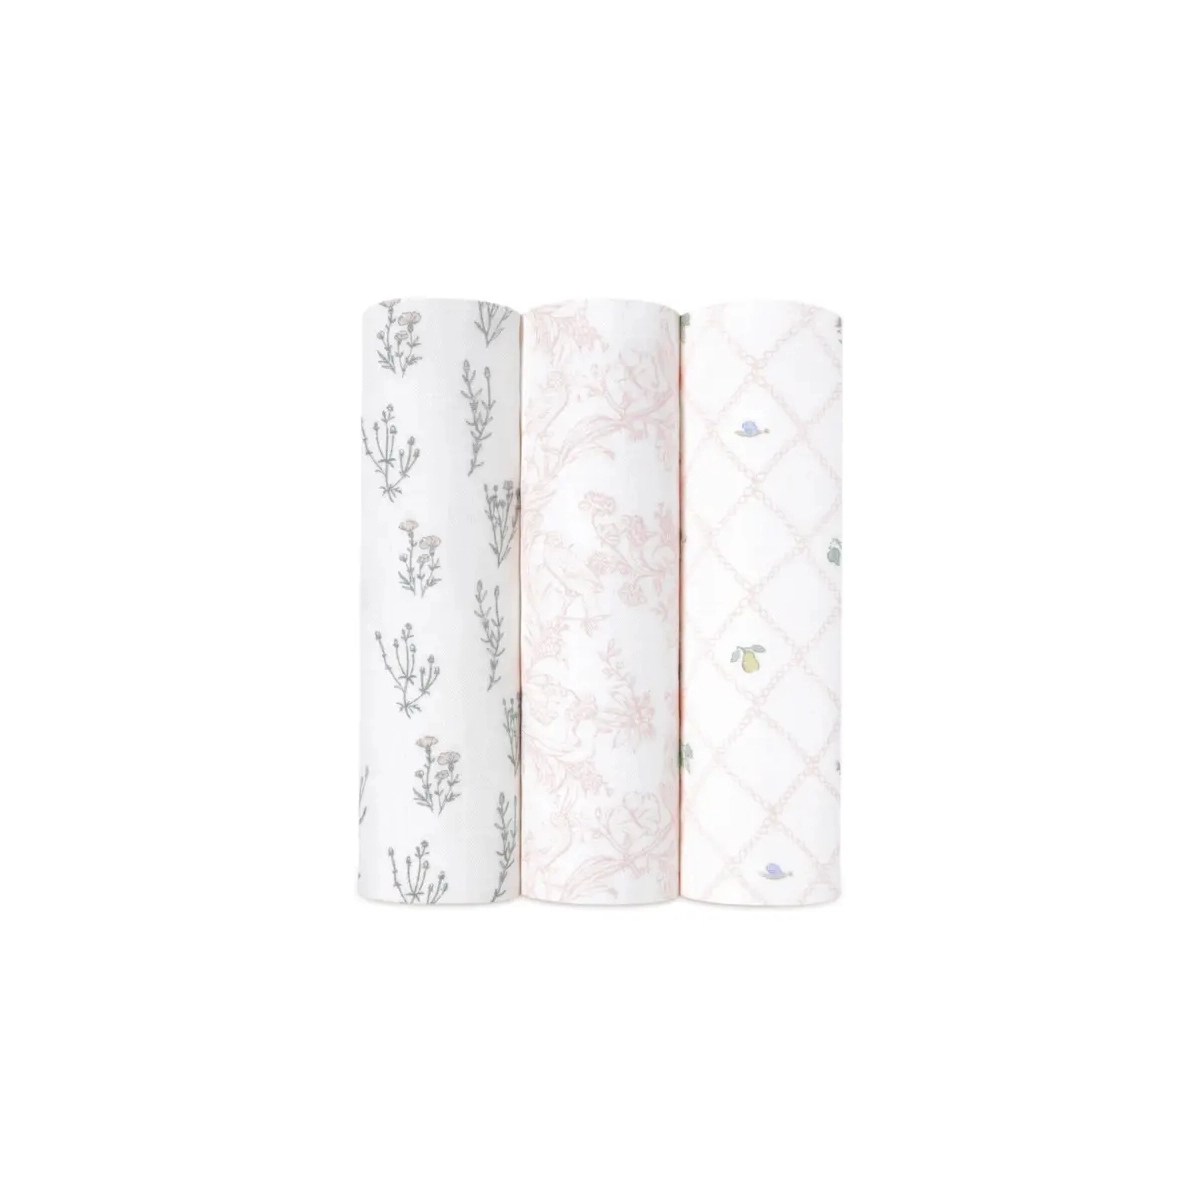 Aden + Anais Pack of 3 Large Swaddle Silky Soft